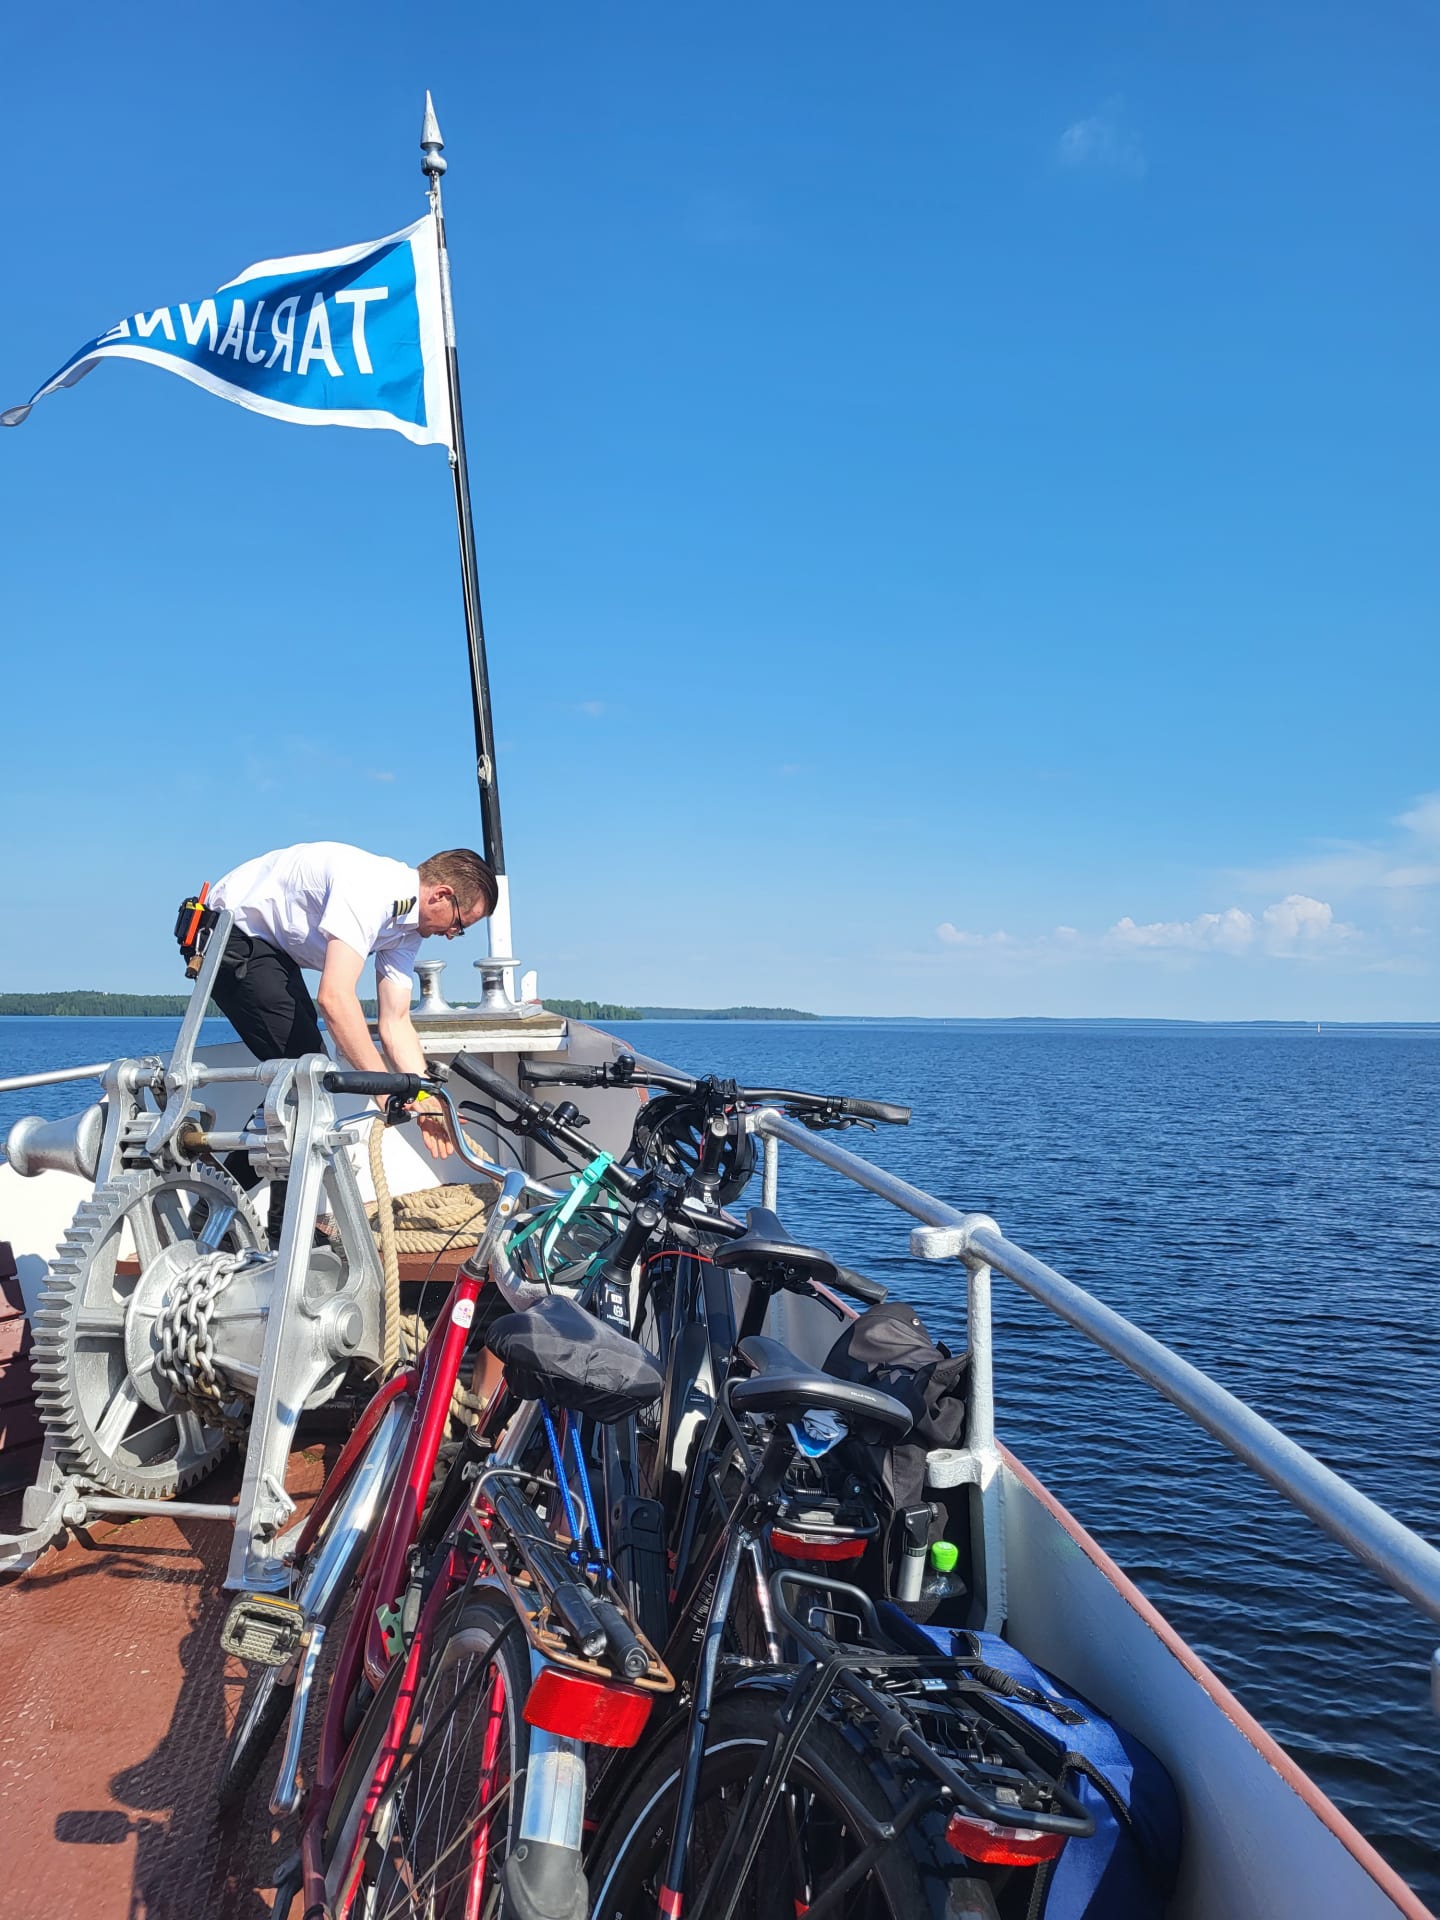 Bike&Boat, s/s Tarjanne, Tampere, blue lake, beautiful summer day, bicycles on board